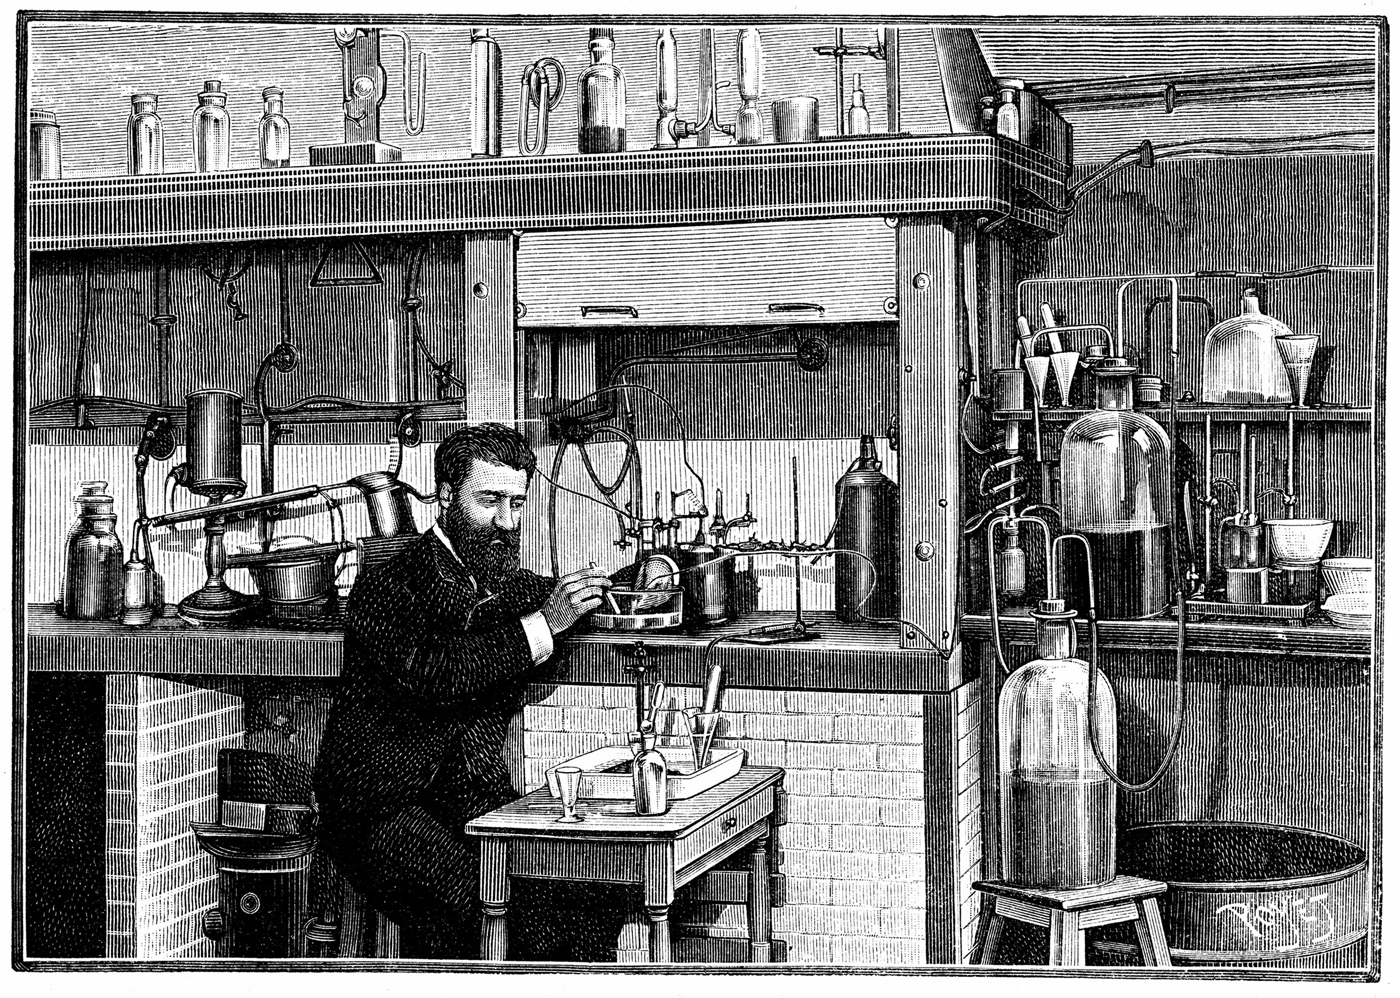 French chemist Henri Moissan was shown at work in his lab at <em>Paris&rsquo;s l&rsquo;Ecole de pharmacie </em>with equipment that often utilized processes ﬁrst explored by scientiﬁc alchemists: distillation, sublimation, evaporation, pulverization, washing, straining, cooking, calciﬁcation and condensation&mdash;processes still widely in use today.